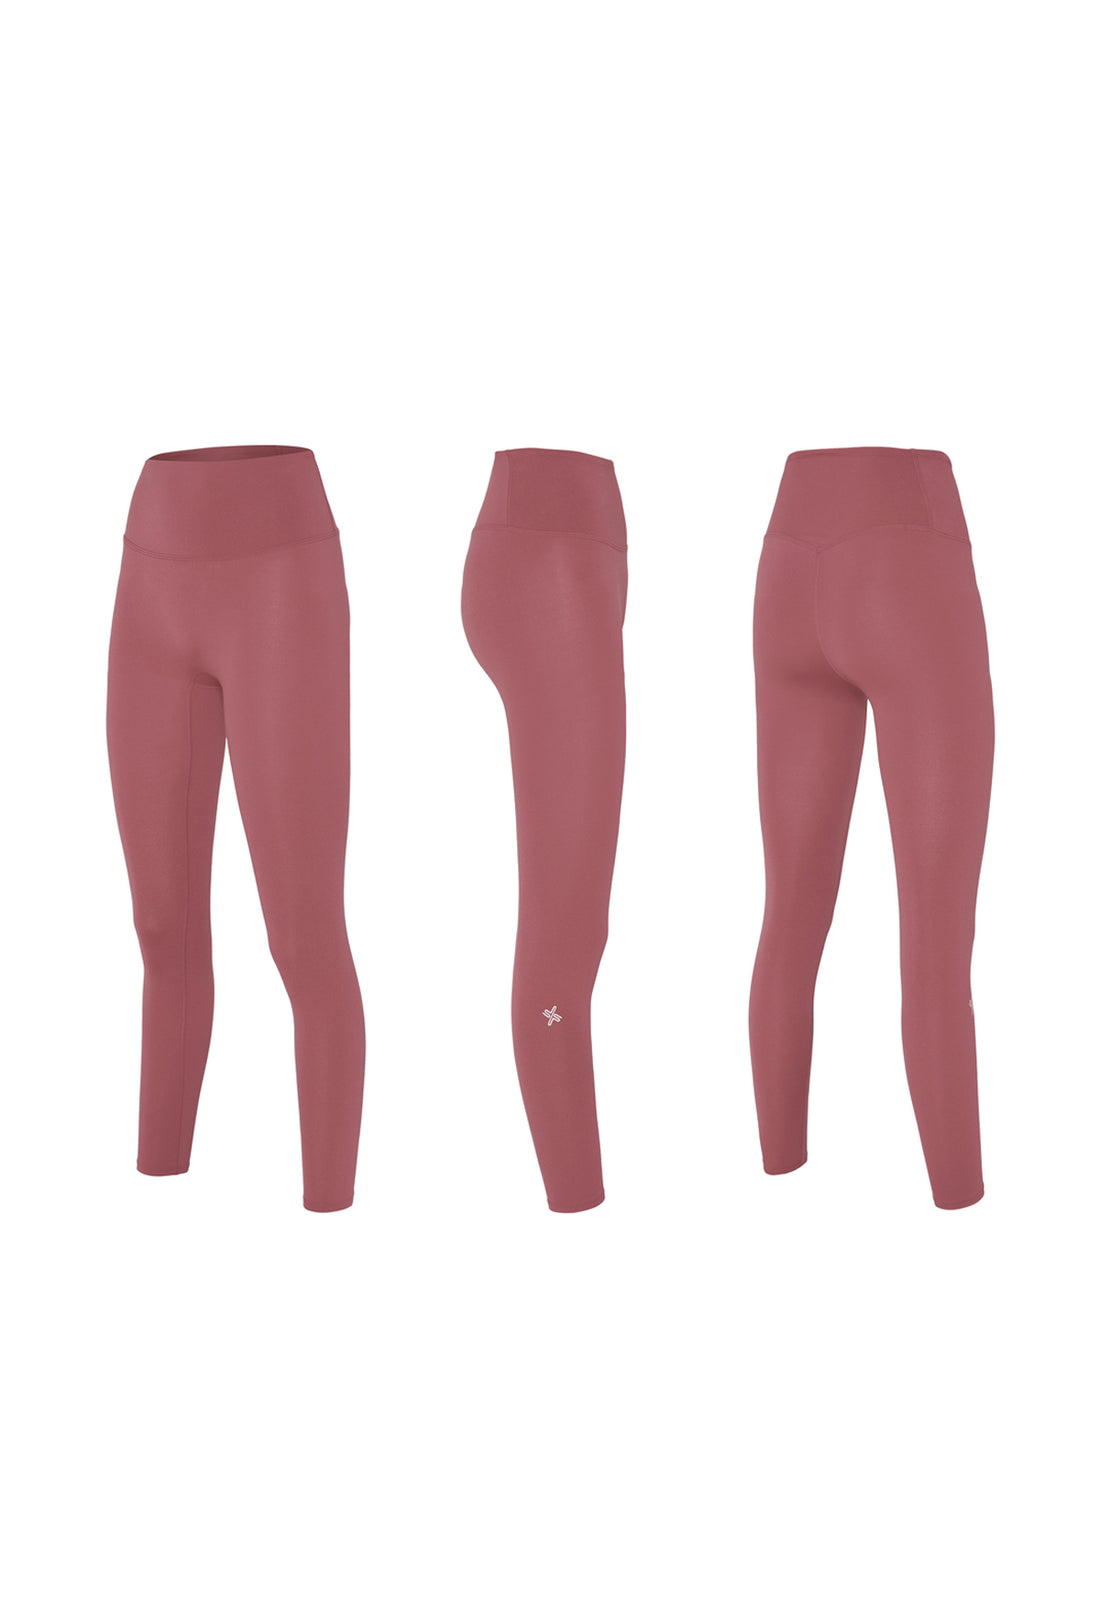 XEXYMIX Uptension Leggings - Chic pink